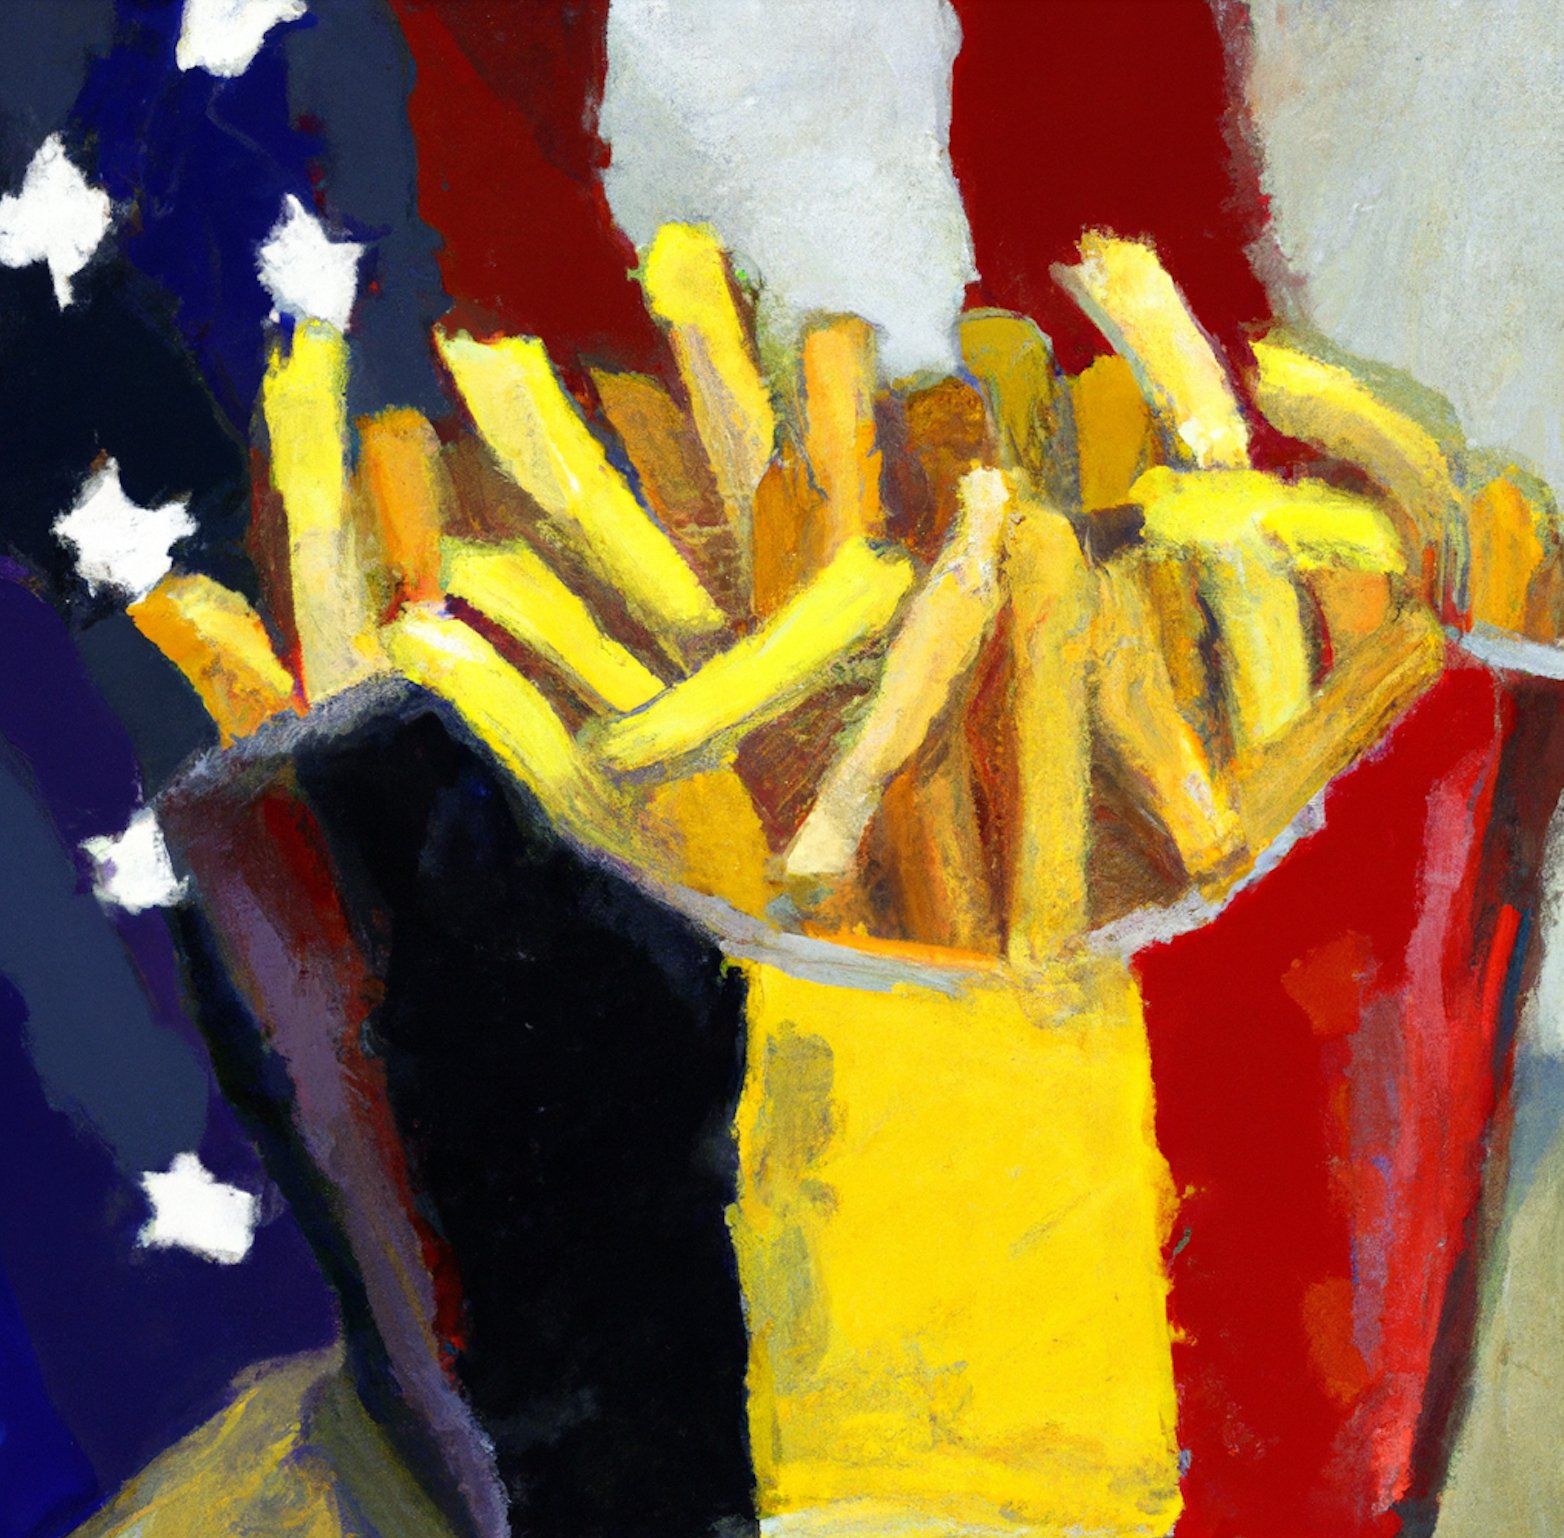 Belgian flag carton of fries with the American flag behind